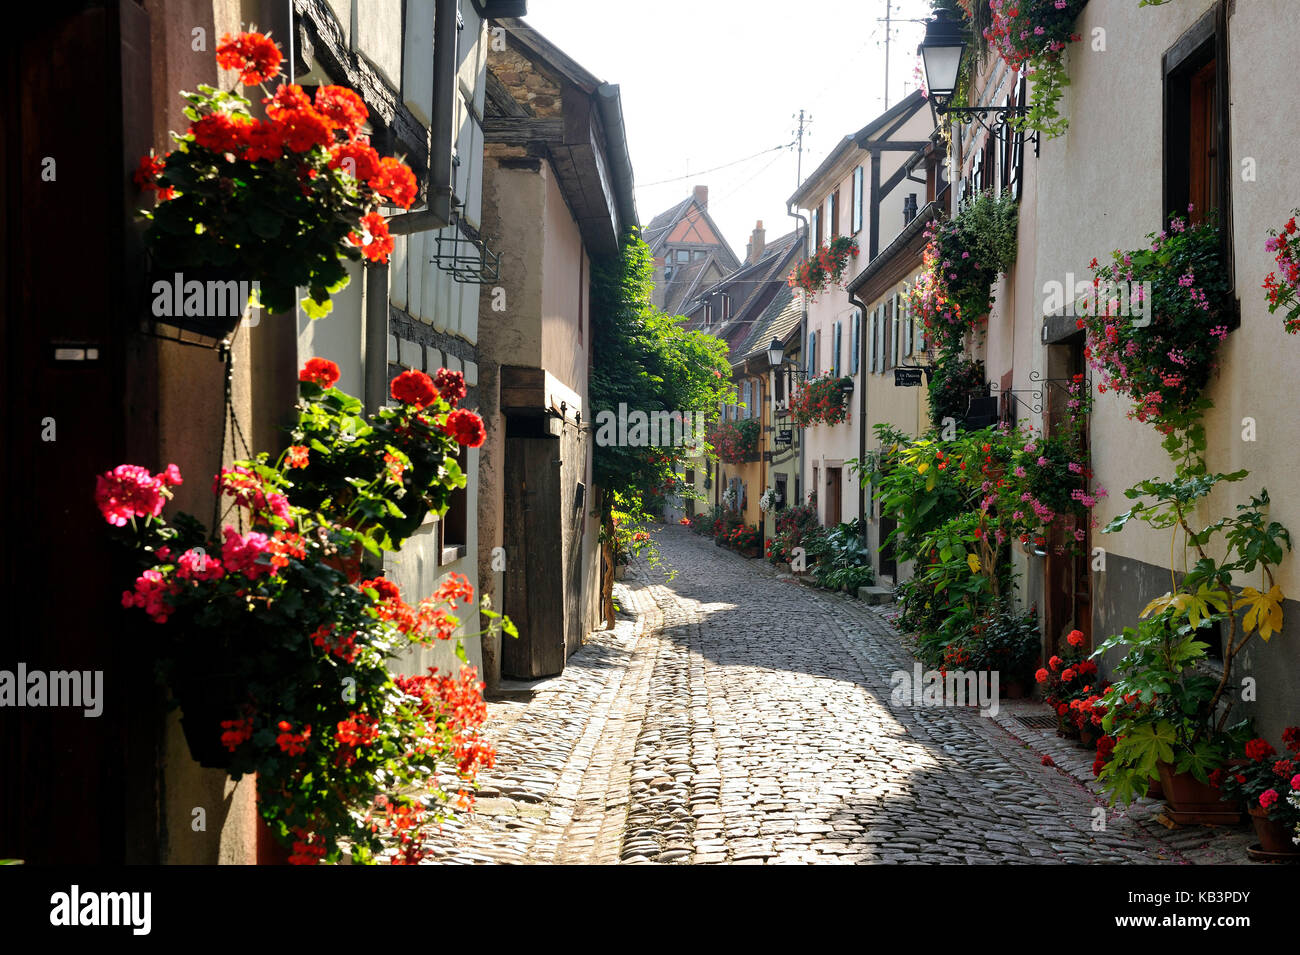 France, Haut Rhin, Alsace Wine Route, Eguisheim, labelled Les Plus Beaux Villages de France (The Most Beautiful Villages of France), traditional half timbered houses Stock Photo